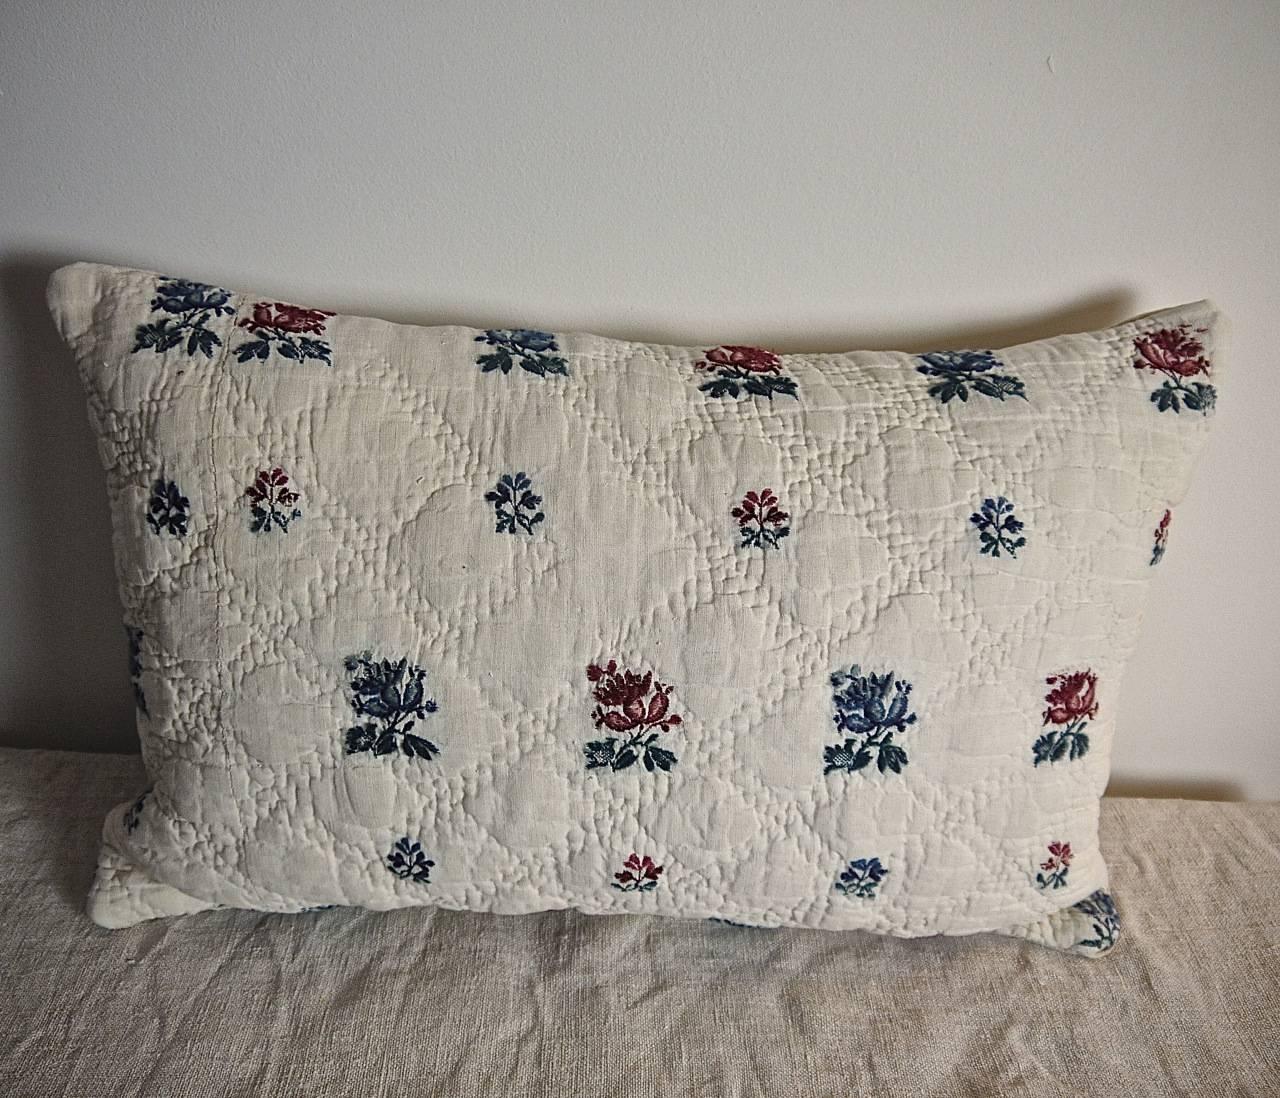 French late 18th century cambresene (wool woven on linen) quilted cushion with a design of alternate red and blue flowers with green leaves. Backed in a 19th century French linen. Slipstitched closed with a duck feather insert.